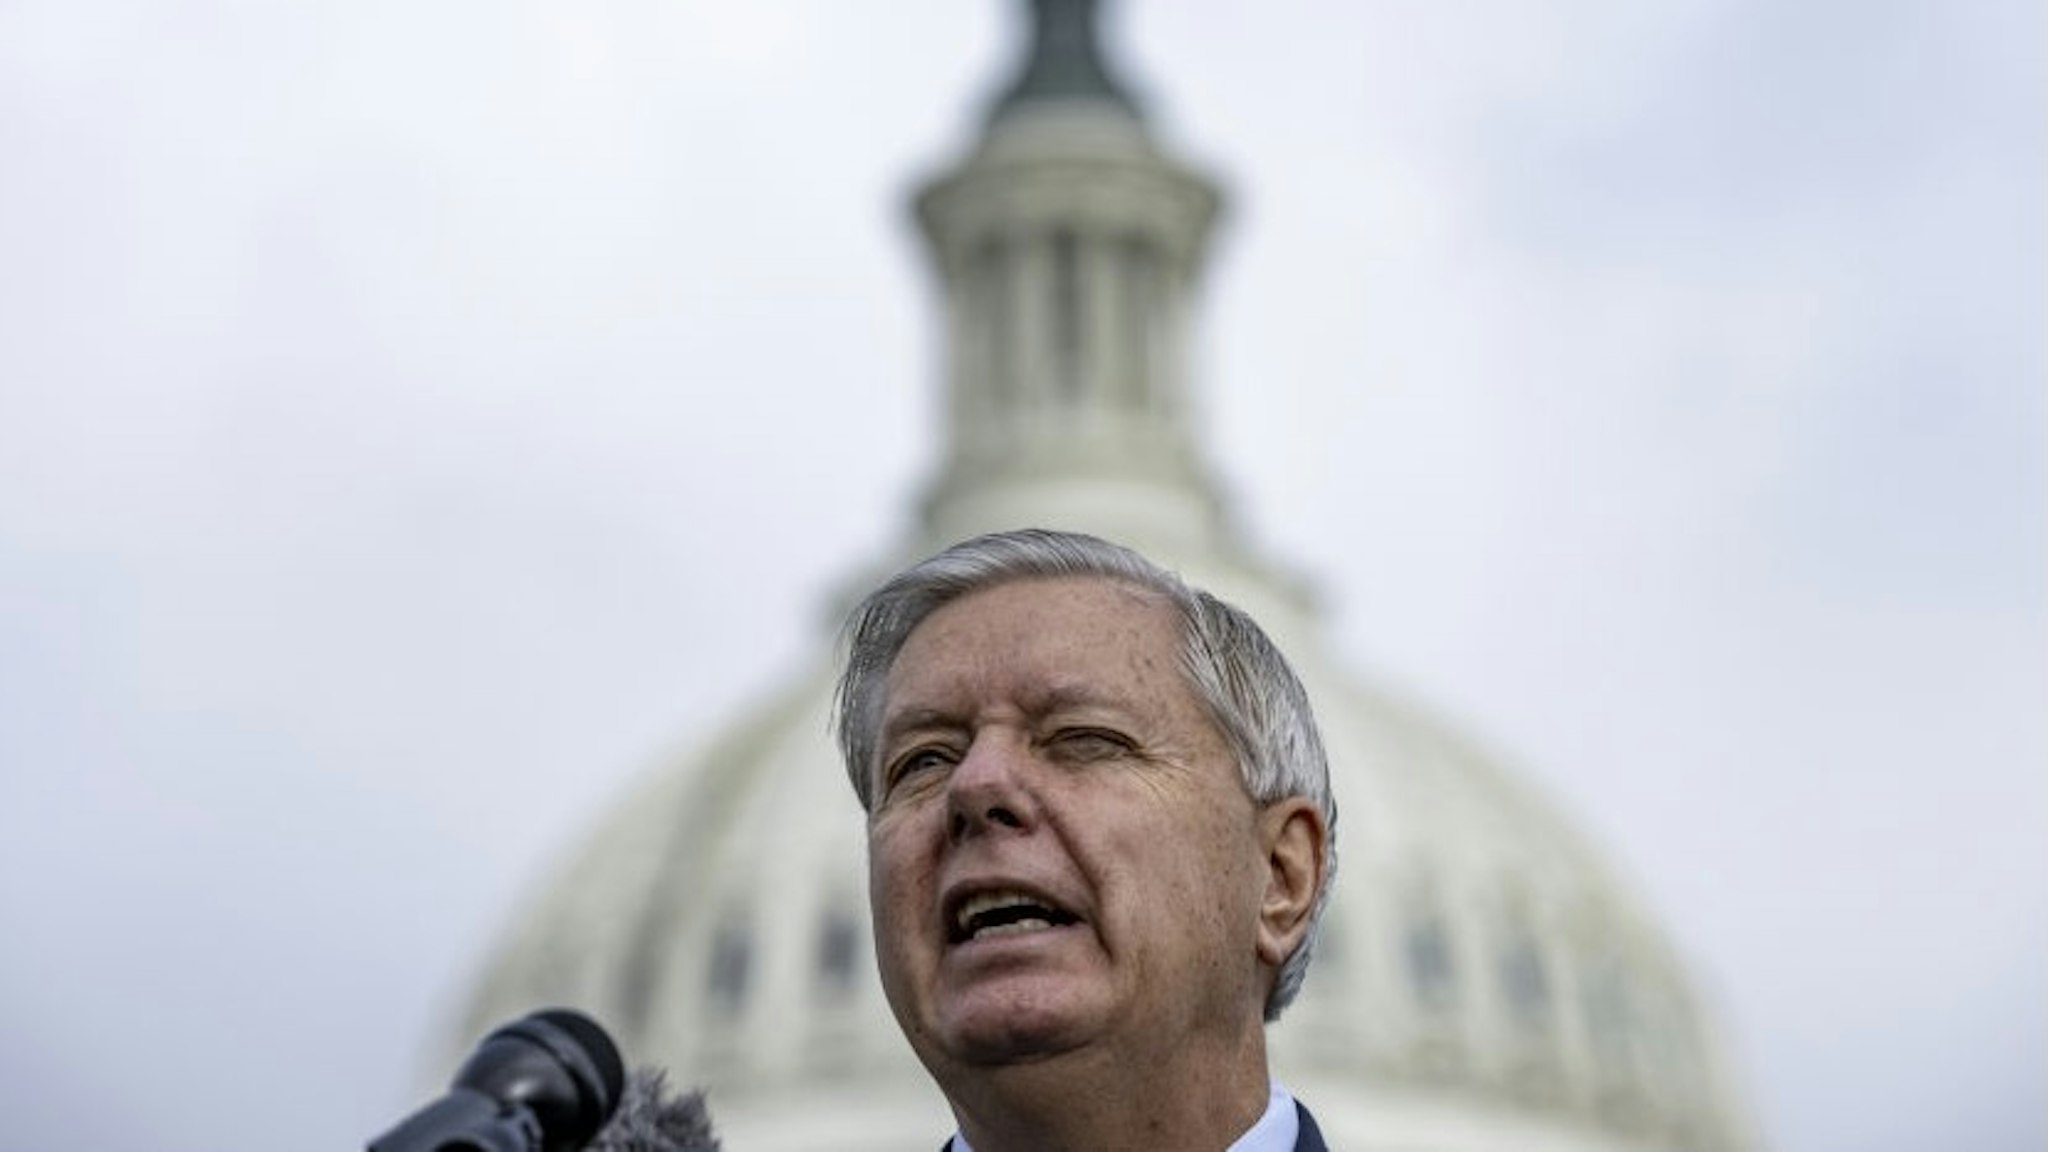 Senator Lindsey Graham, a republican from North Carolina, speaks during a news conference on immigration reform in Washington, D.C., U.S., on Wednesday, March 17, 2021. President Biden's next major economic package will almost certainly have to rely once again on a Democrat-only approach after Senate Minority Leader McConnell shut the door on Republican support for tax hikes to pay for it. Photographer: Samuel Corum/Bloomberg